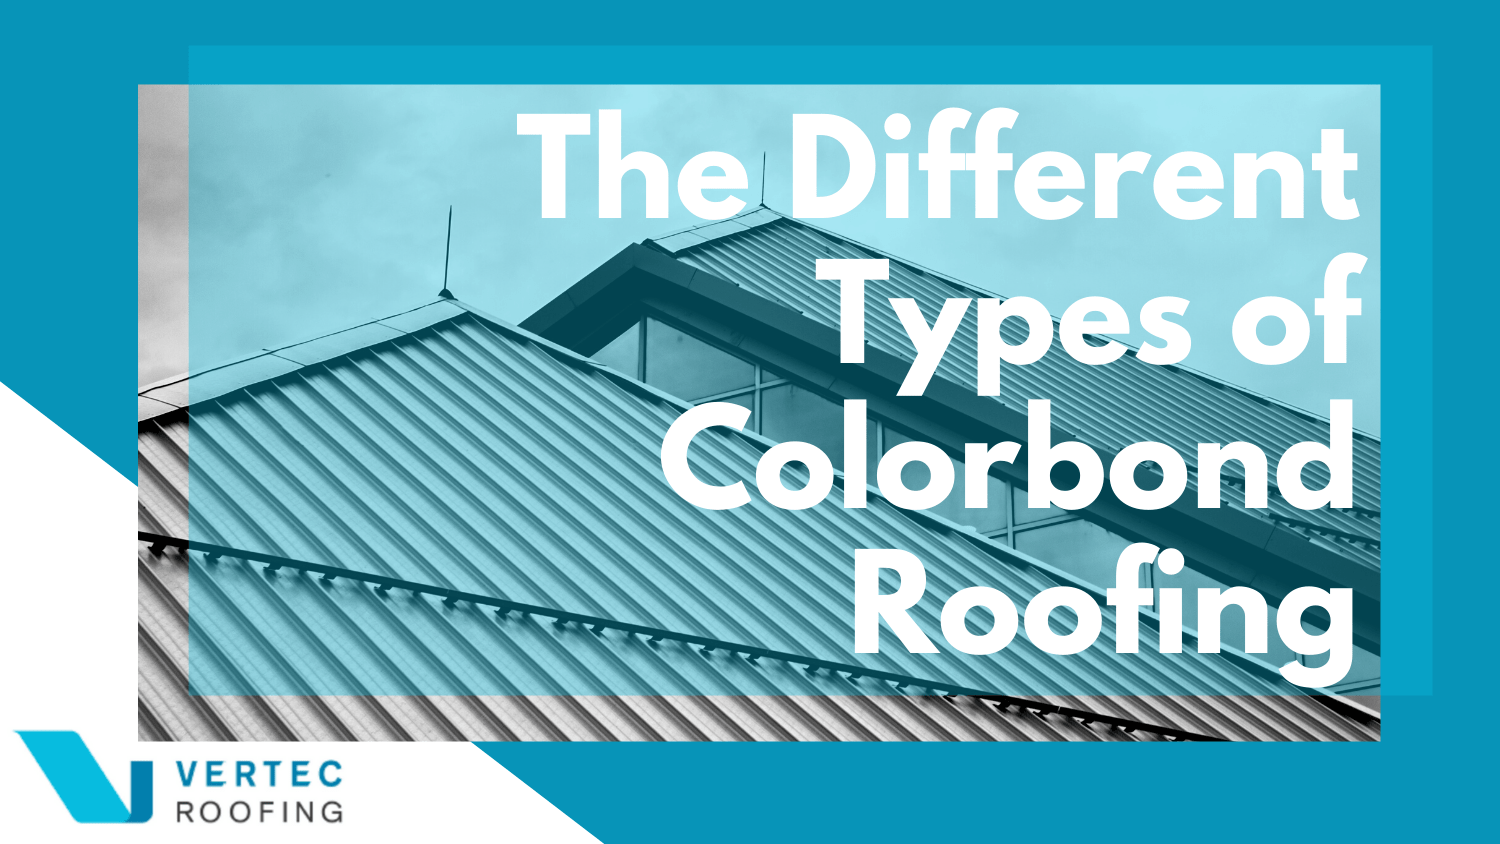 The Different Types of Colorbond Roofing